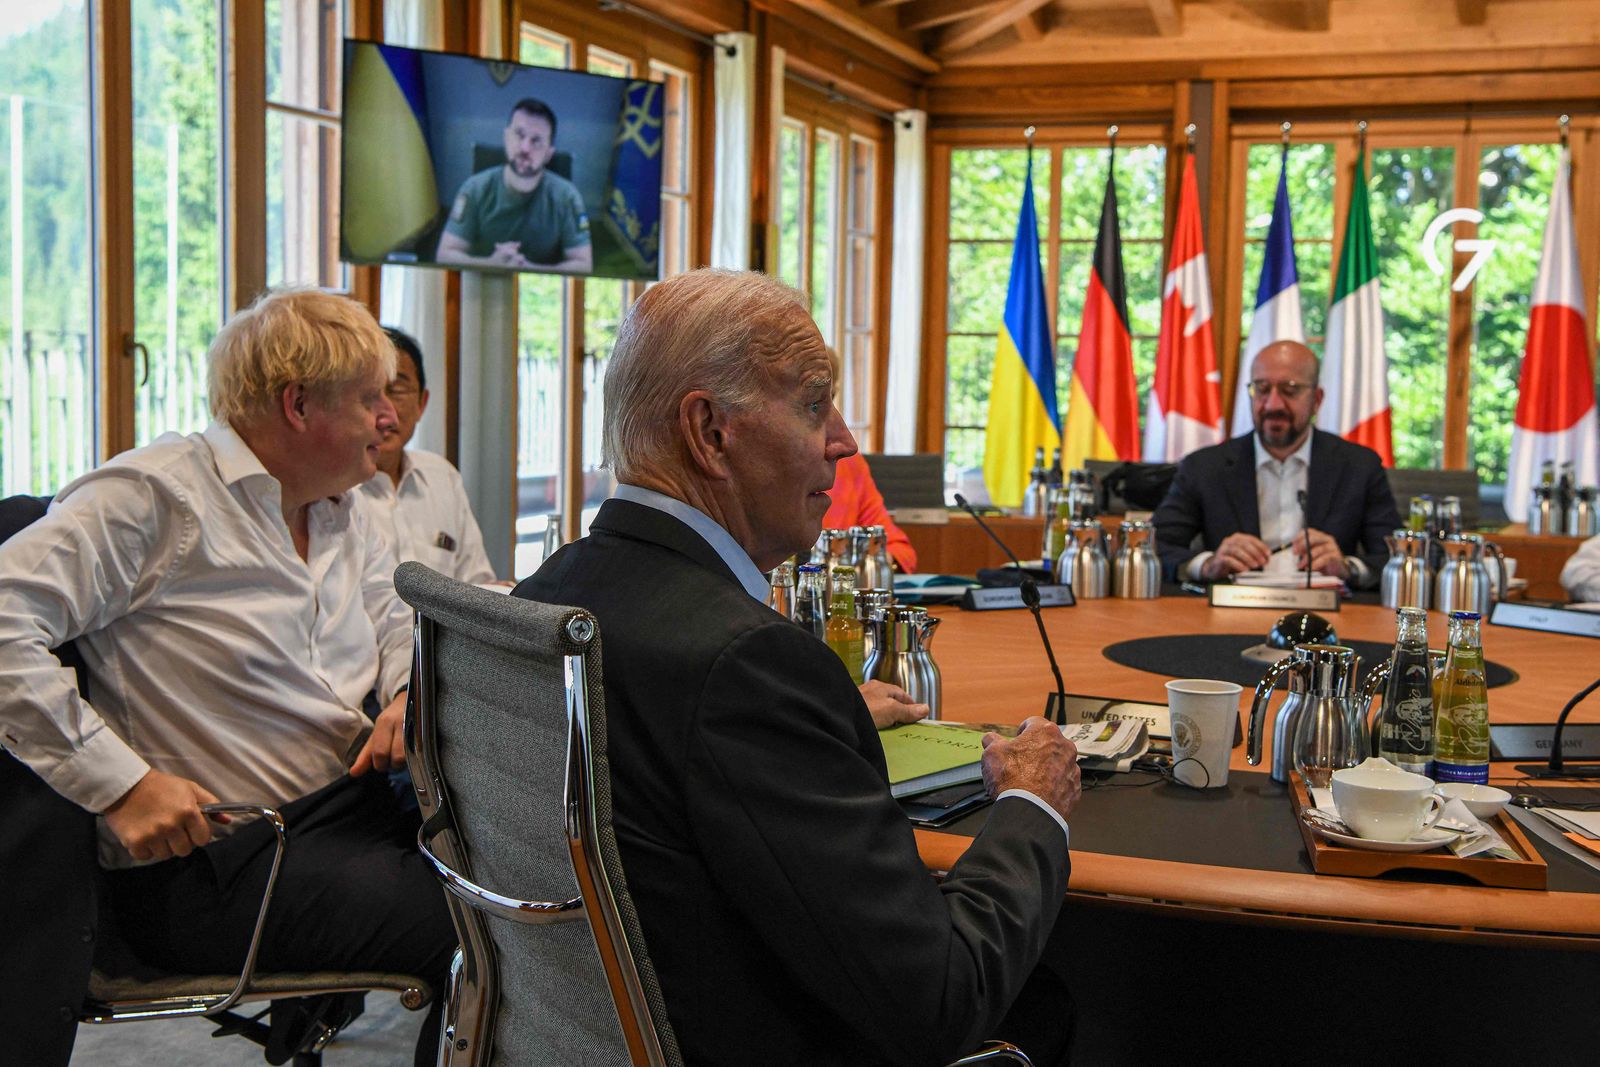 (L-R) Britain's Prime Minister Boris Johnson, Japan's Prime Minister Fumio Kishida, US President Joe Biden and European Council President Charles Michel have taken seat at a round table as Ukraine's President Volodymyr Zelensky (on the screen) addresses G7 leaders via video link during their working session on June 27, 2022 at Elmau Castle, southern Germany, where the German Chancellor hosts a summit of the Group of Seven rich nations (G7). - G7 leaders are under pressure to hold fast to climate pledges when they meet in Bavaria from June 26 to 28, as Russia's energy cuts trigger a dash back to planet-heating fossil fuels. (Photo by Kenny Holston / POOL / AFP) - AFP